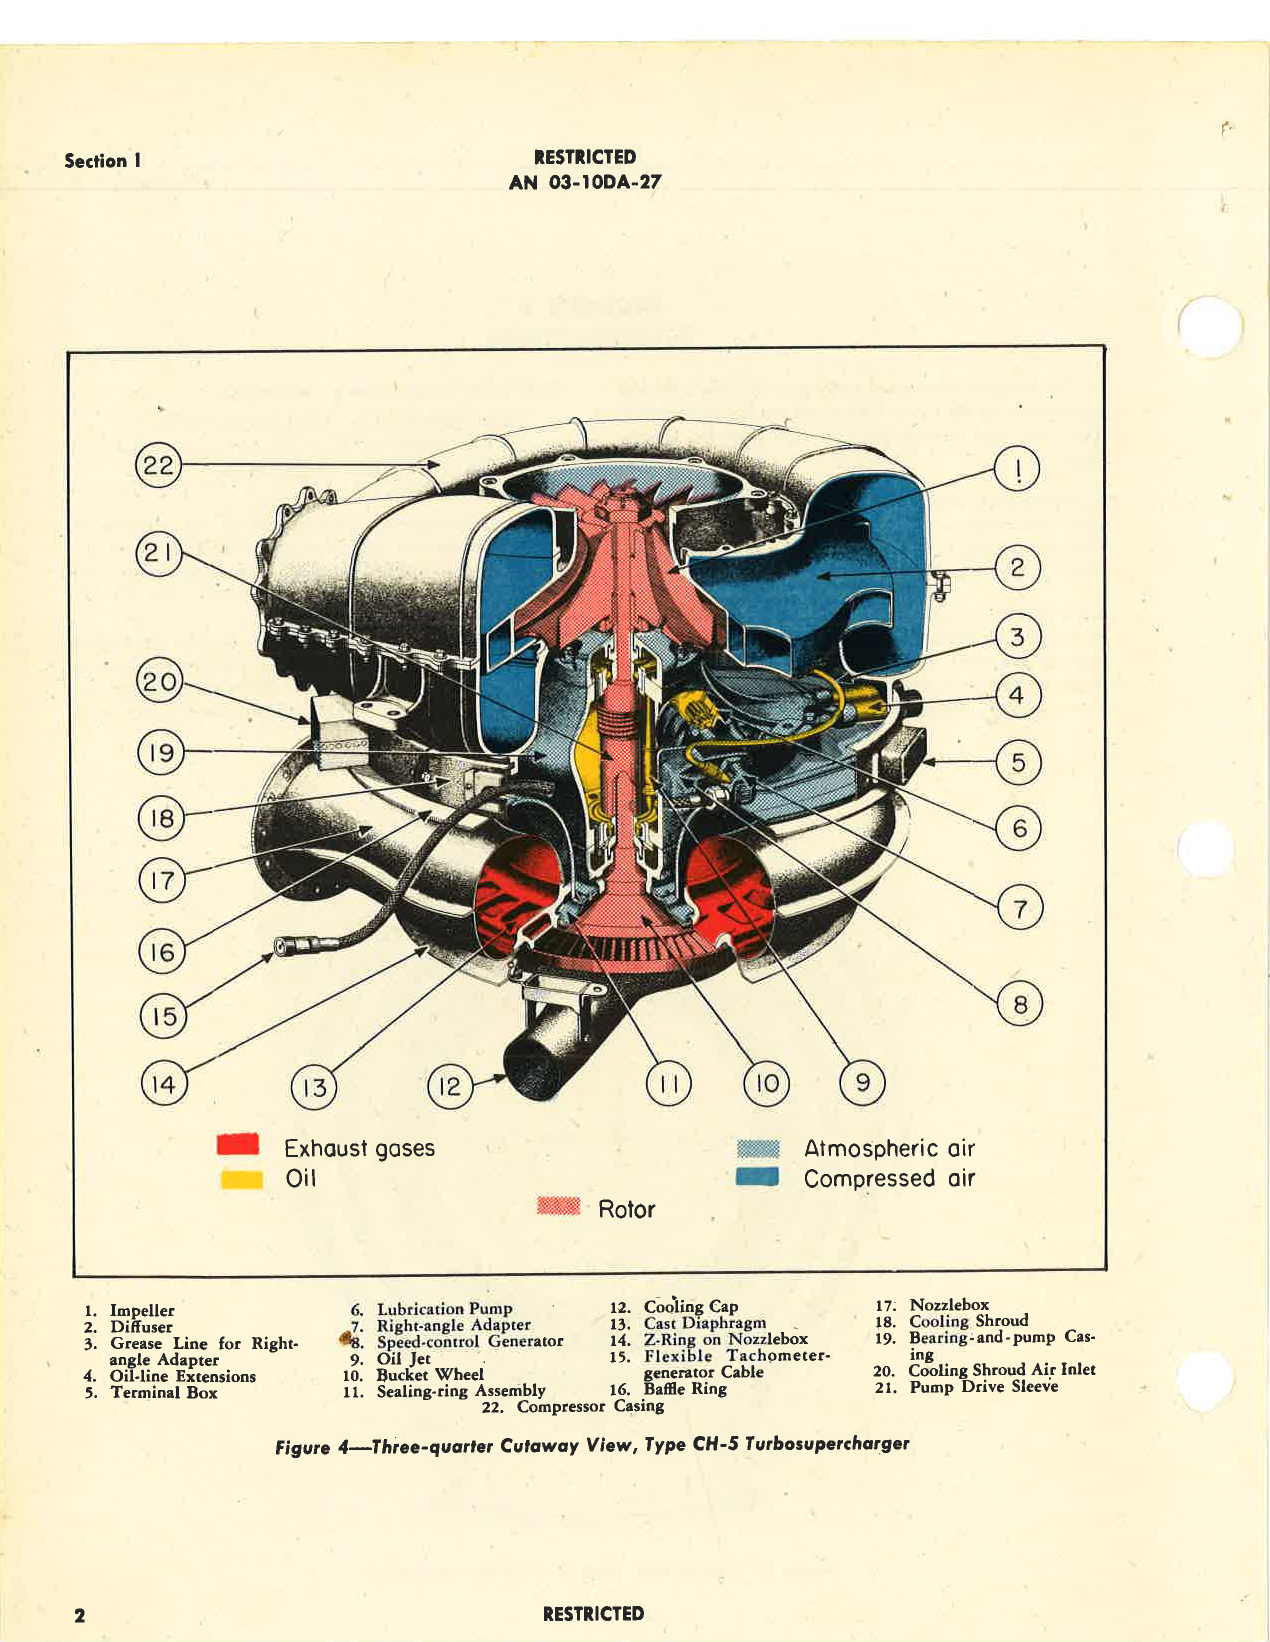 Sample page 6 from AirCorps Library document: Handbook of Instructions with Parts Catalog for Type CH-5 Turbosupercharger